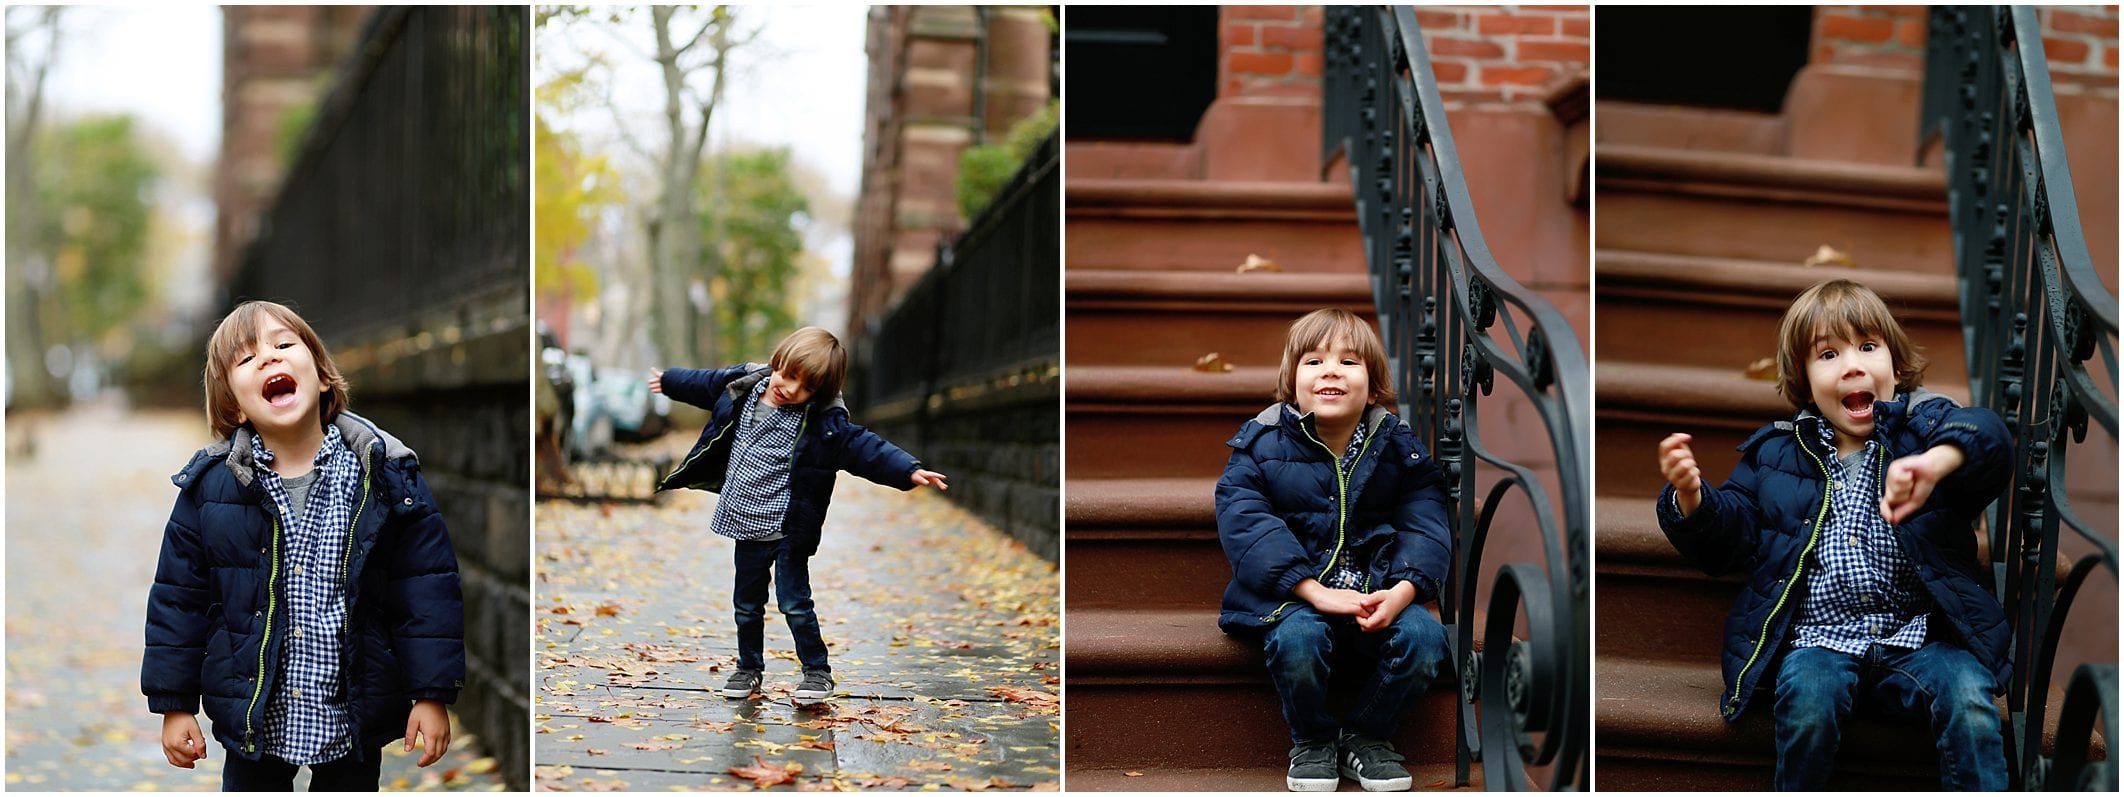 Cobble Hill Brooklyn Photographer .Children of New York: Helena Woods Destination Family Newborn Children's Portraiture shares her favorite sessions and kids in New York City. Locations featured: Central Park Gantry Plaza State Park Long Island Prospect Park Brooklyn